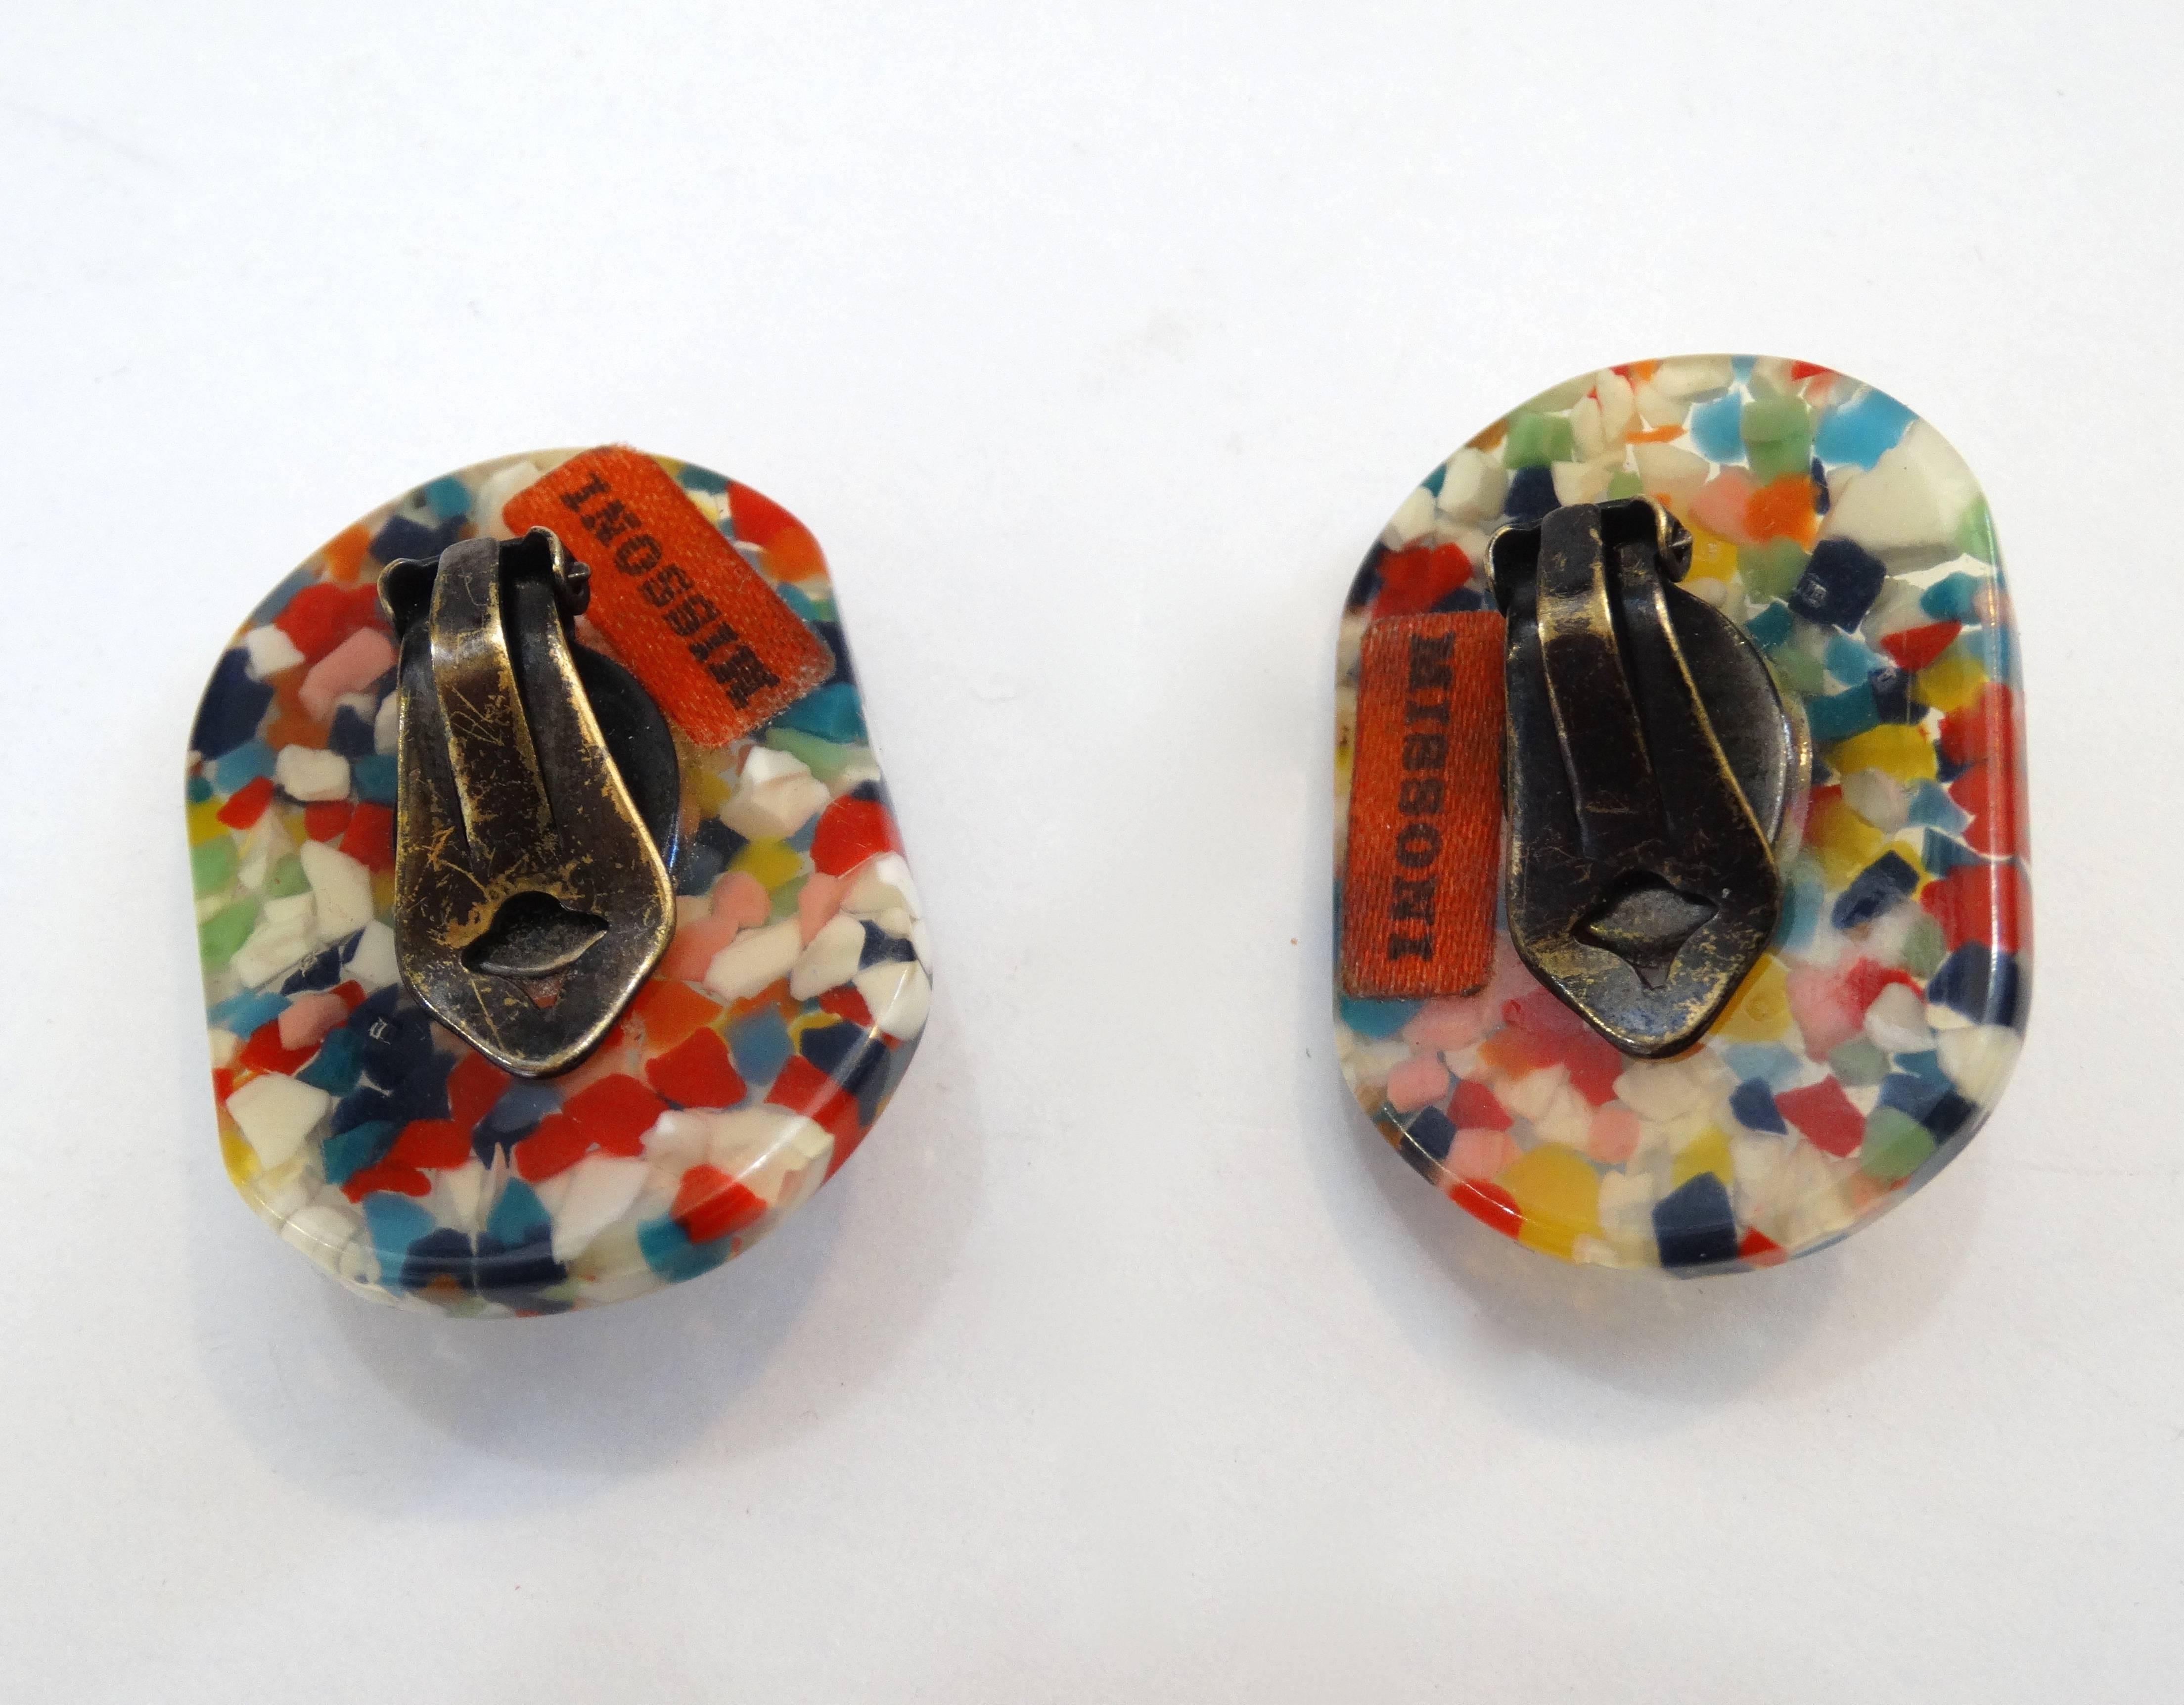 Missoni Lucite Confetti Rhinestone Earrings, 1980s  In Excellent Condition For Sale In Scottsdale, AZ